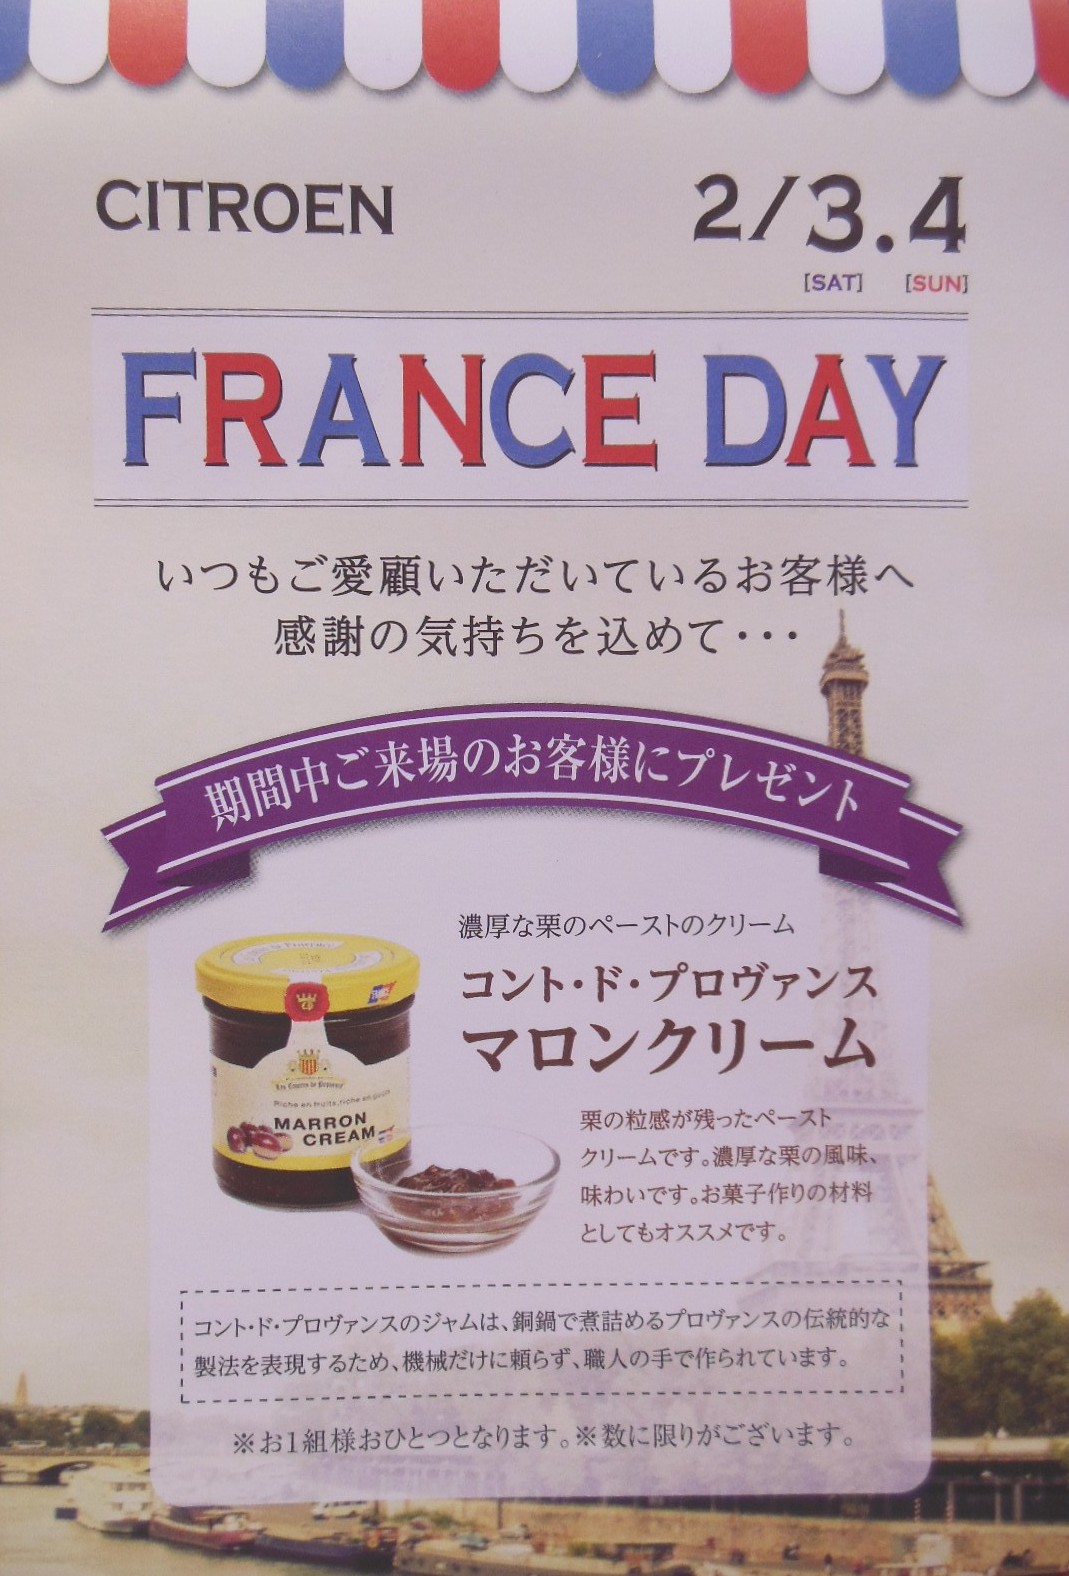 FRANCE DAY開催中です！